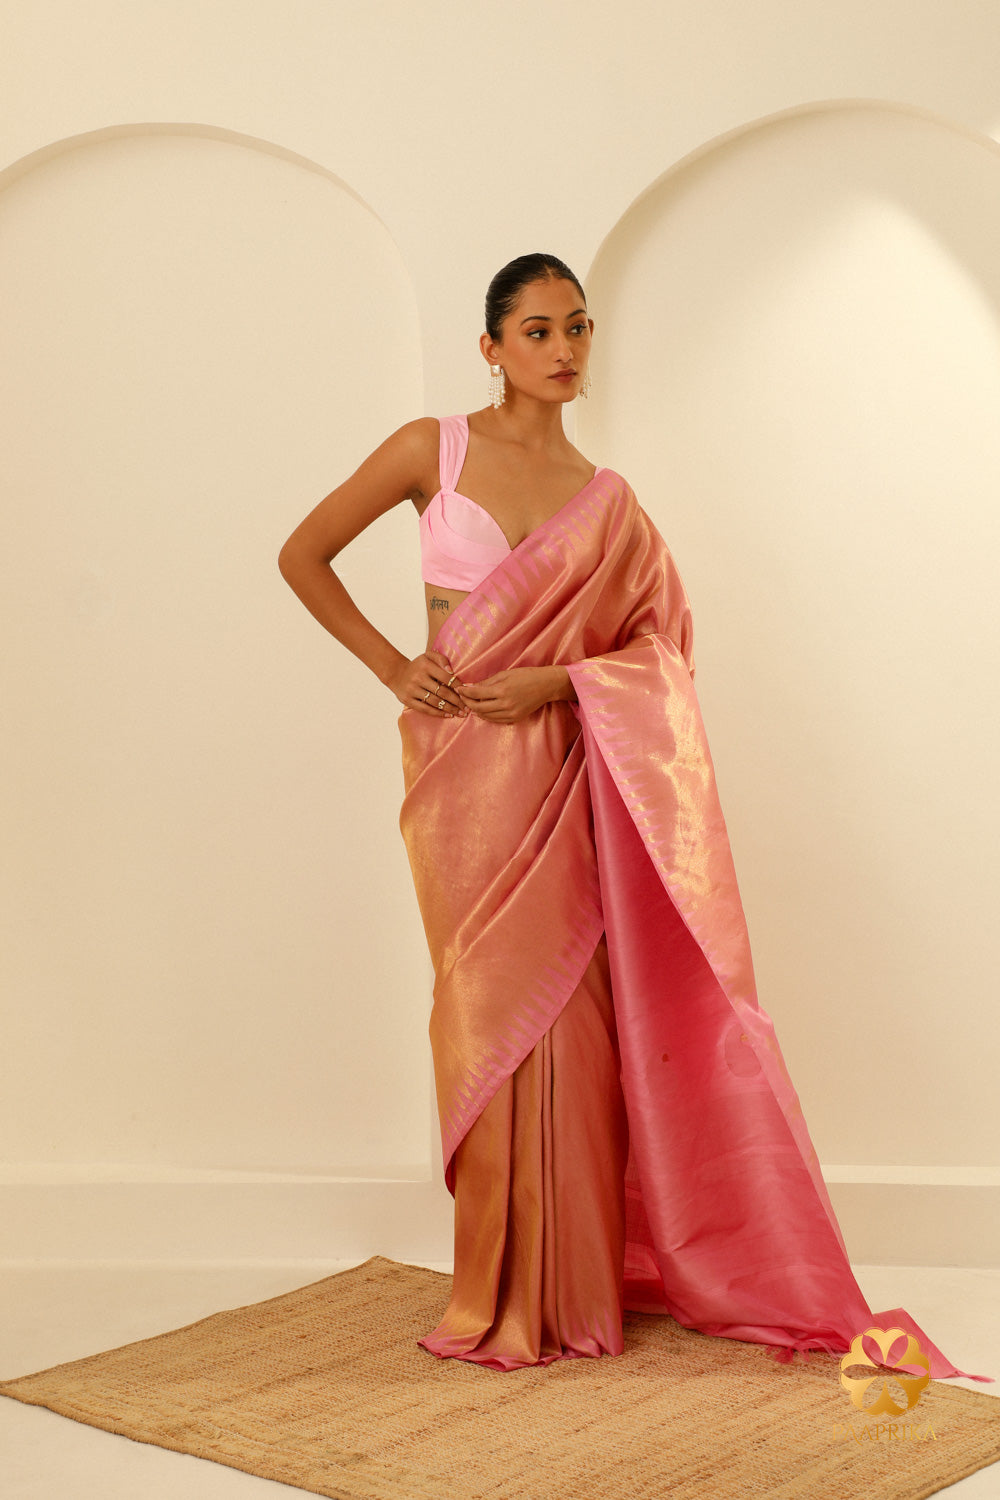 A stylish woman wearing the Pastel Pink Kanjivaram Handwoven Saree, radiating elegance and charm at a special occasion.